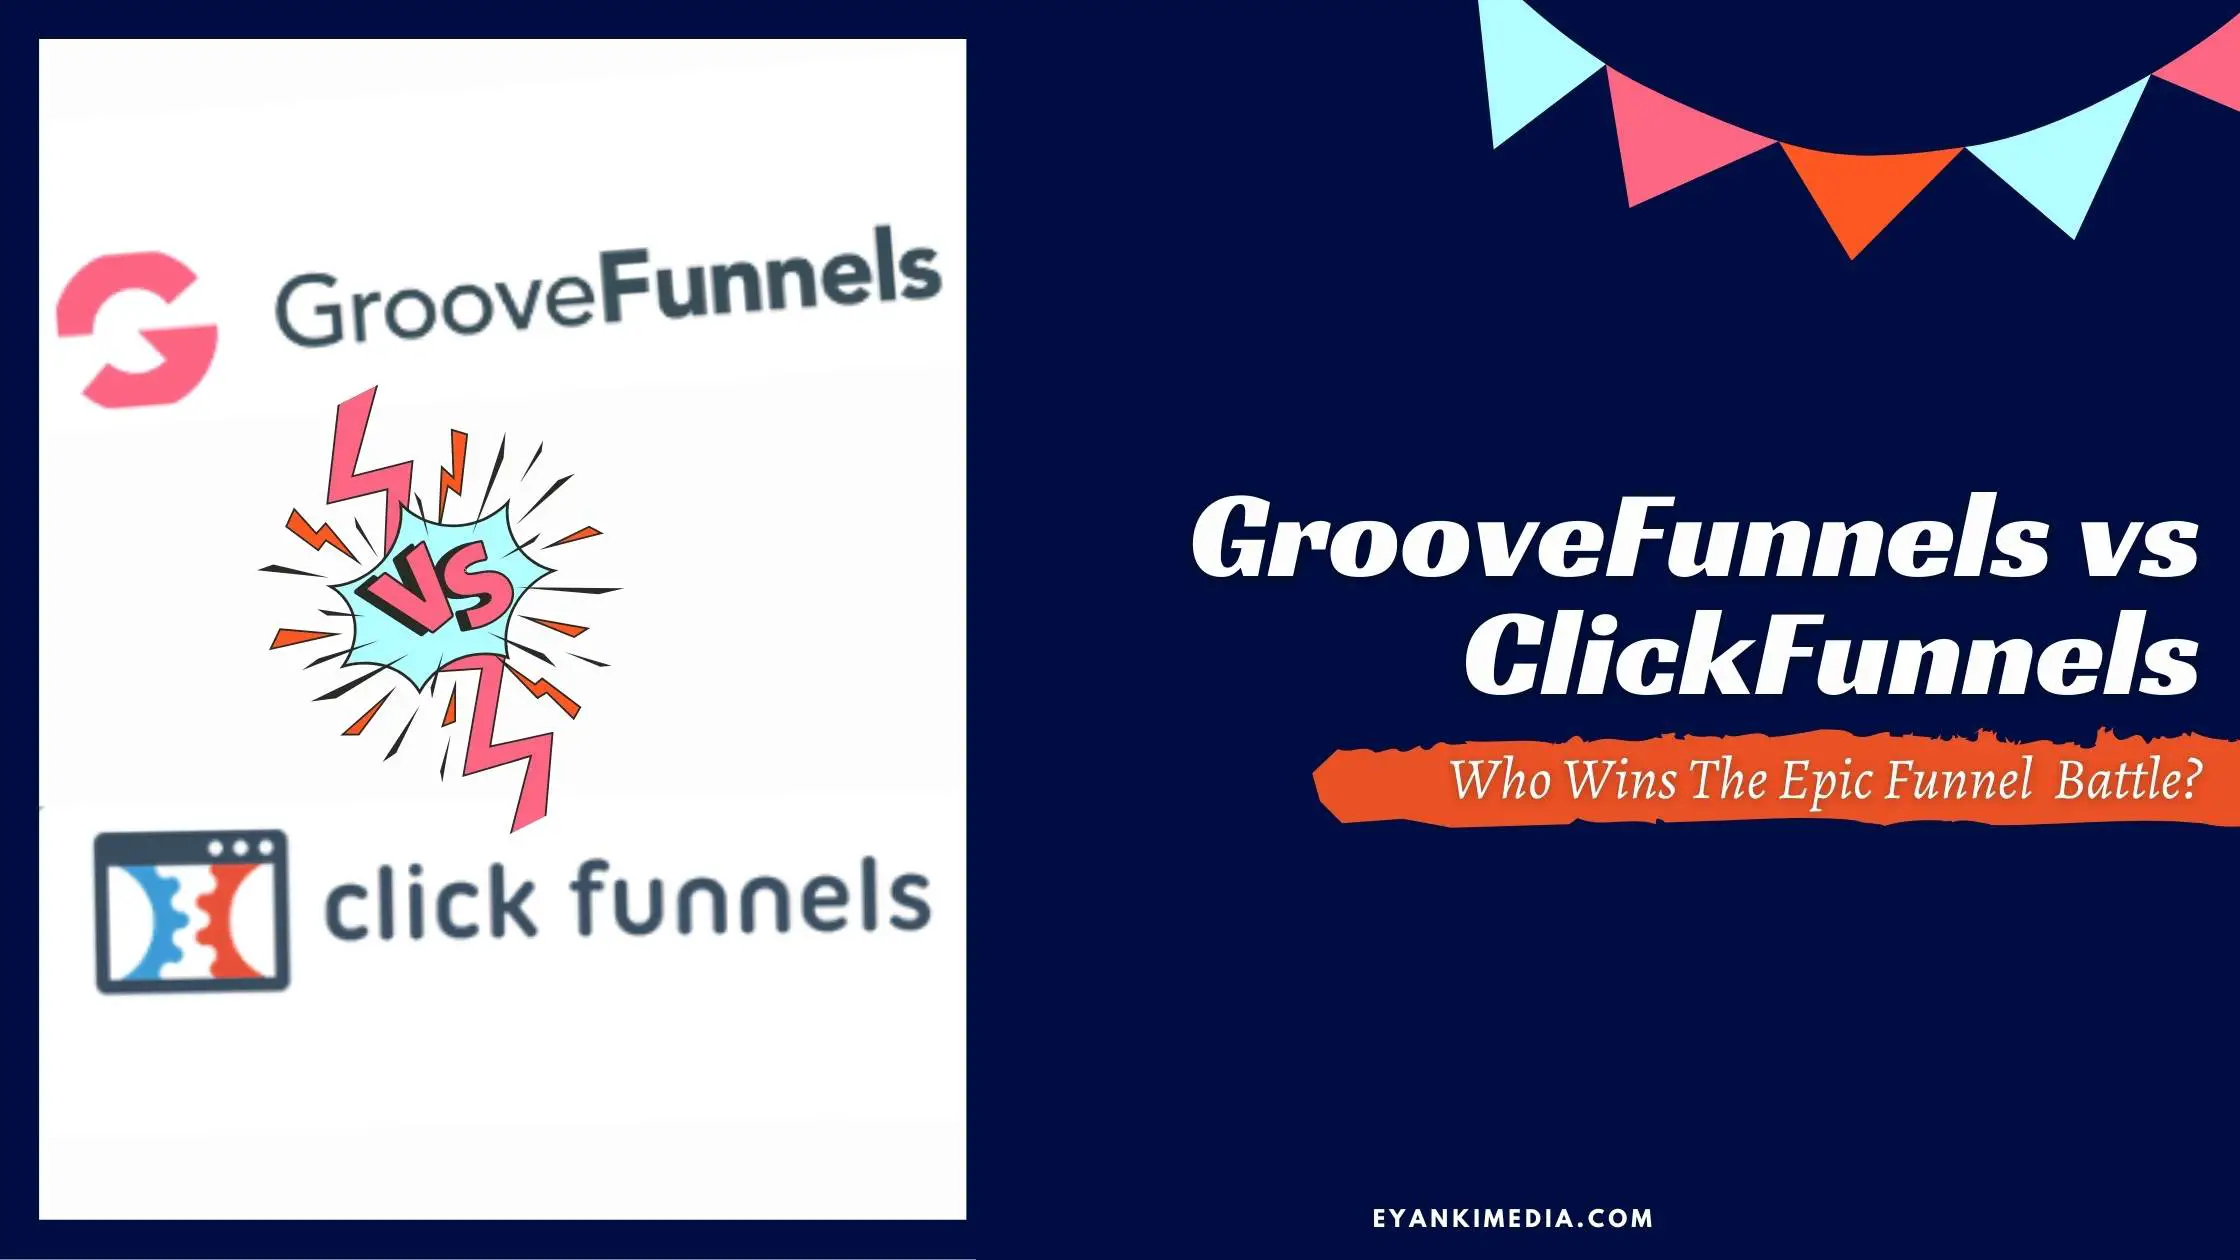 See This Report about Groovefunnels Review, Pricing & Concerns (2021 Update)